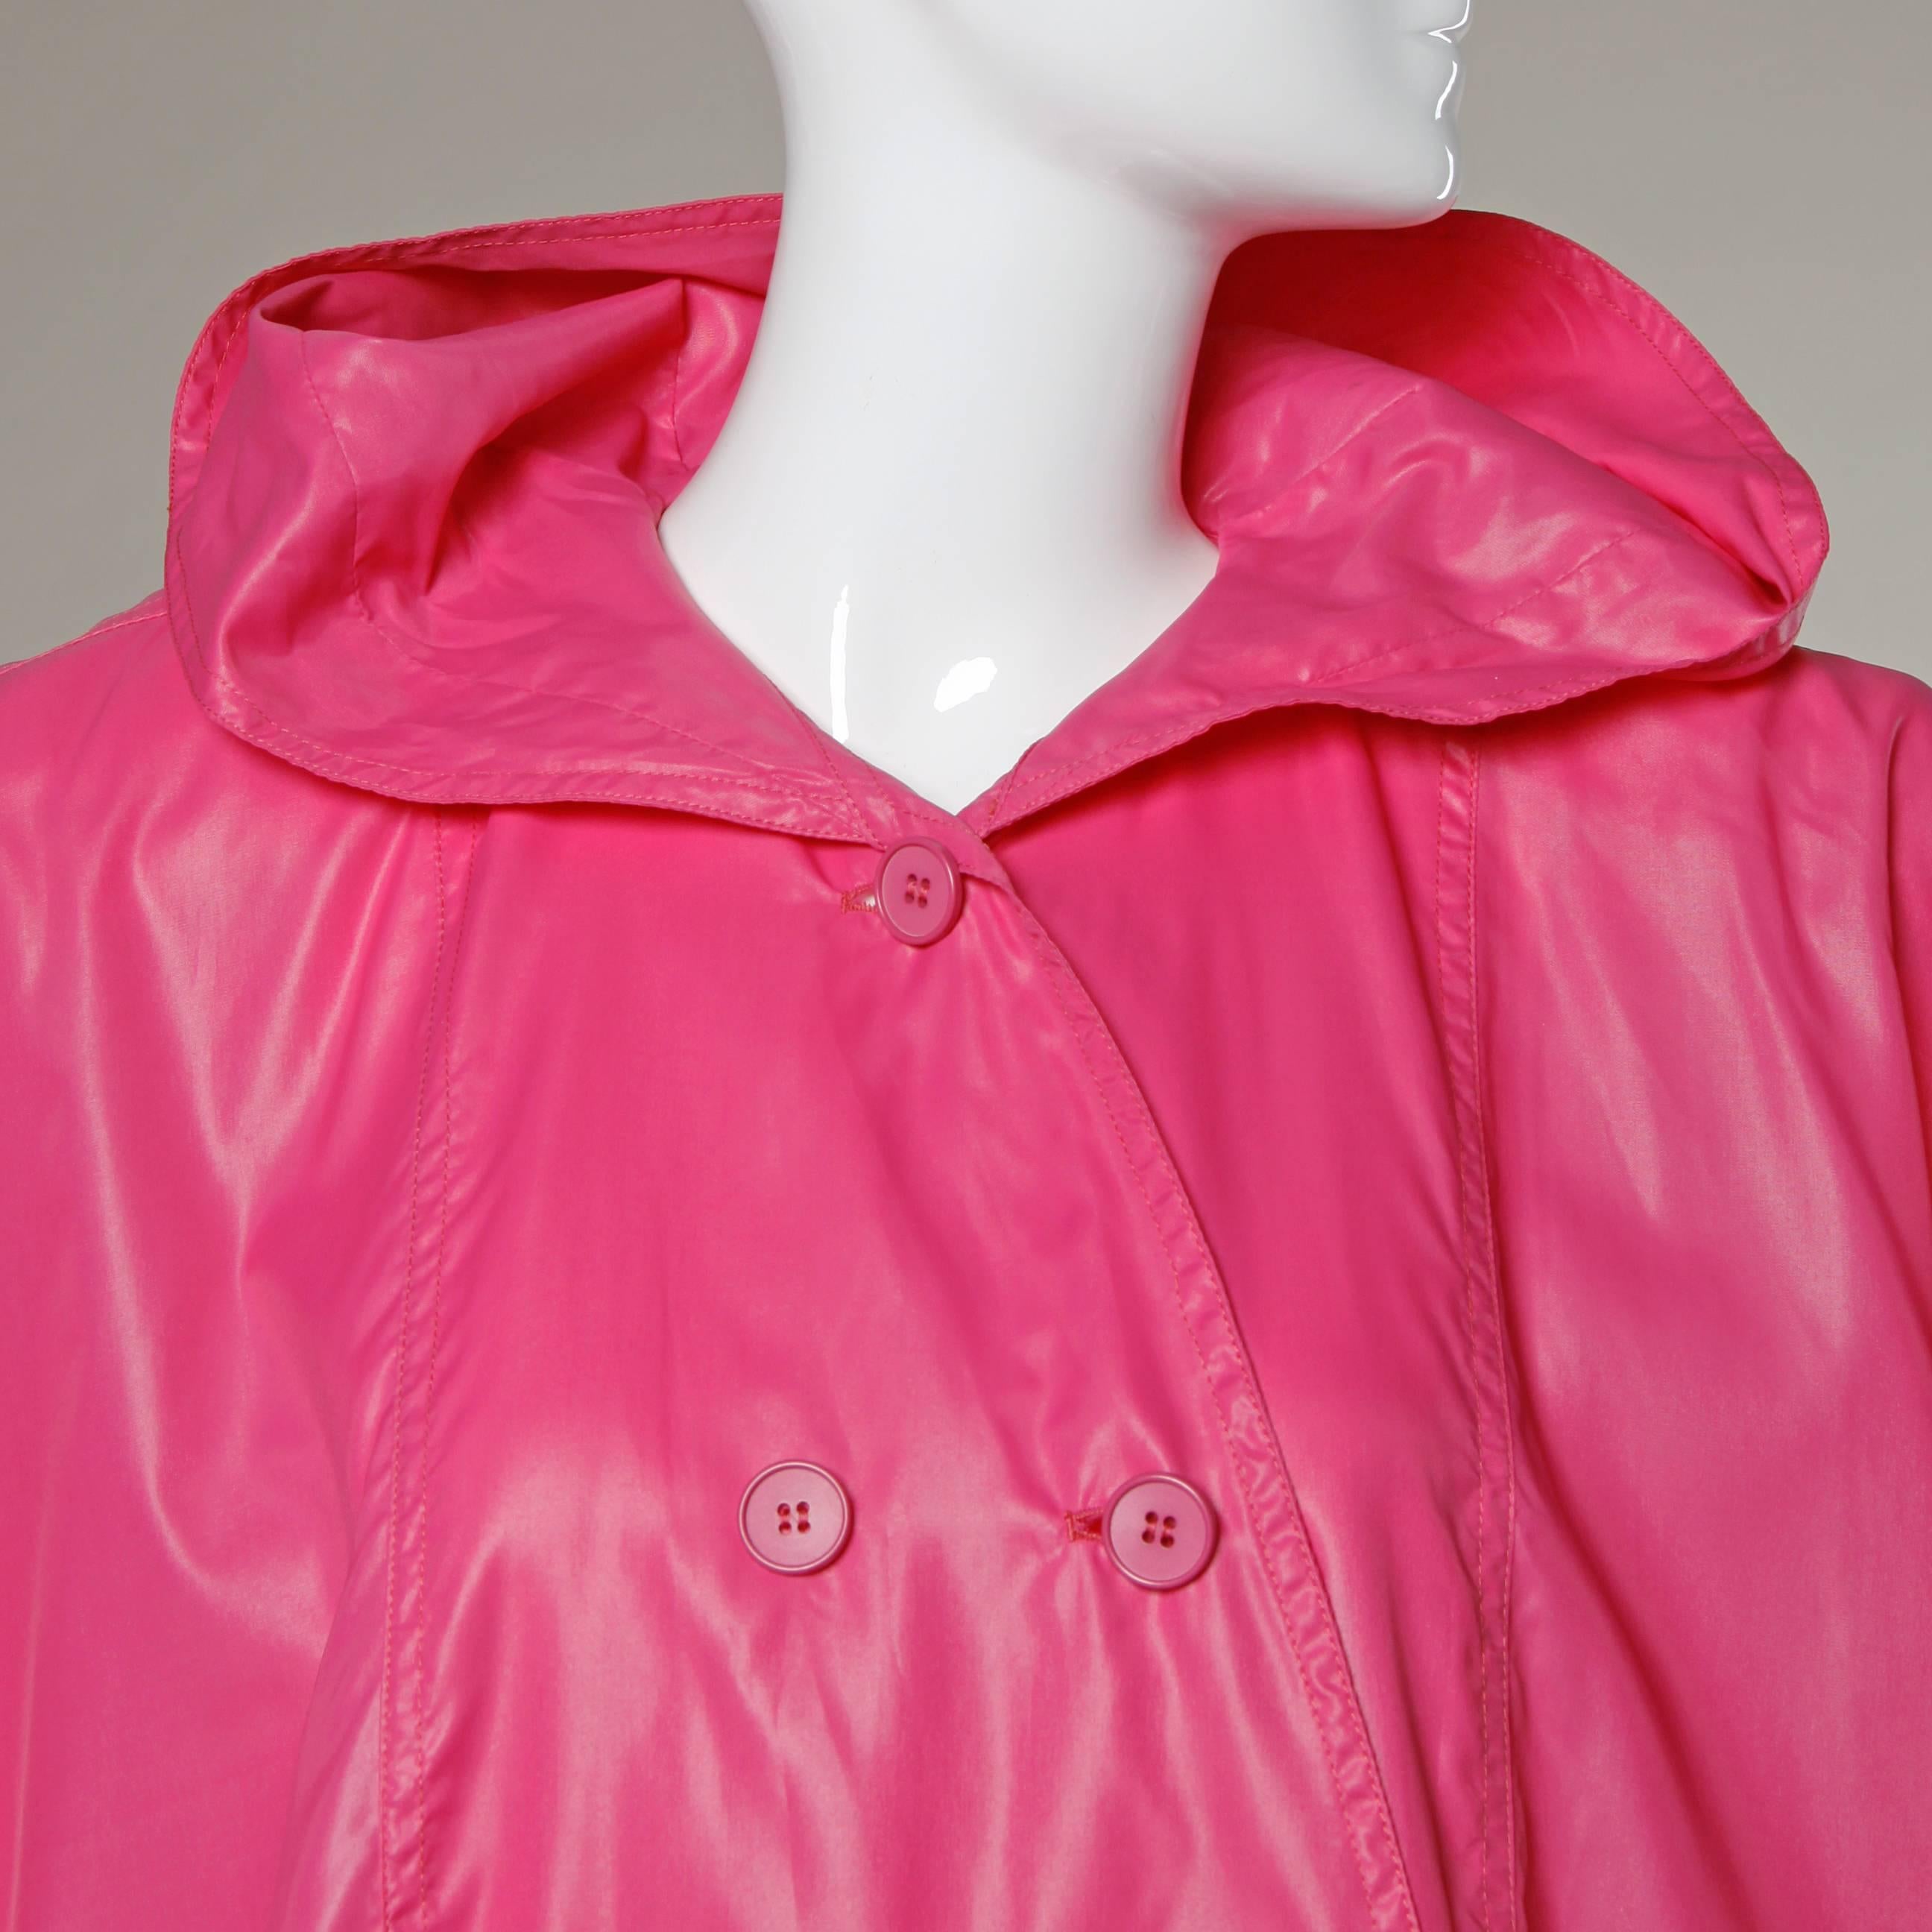 Bright pink rain coat by Salvatore Ferragamo with bat wing sleeves, swing shape and hood.

Details:

Unlined
Front Pockets
Shoulder Pads Can Easily Be Removed If Desired
Front Button Closure
Marked Size: One Size
Color: Bright Pink
Fabric: